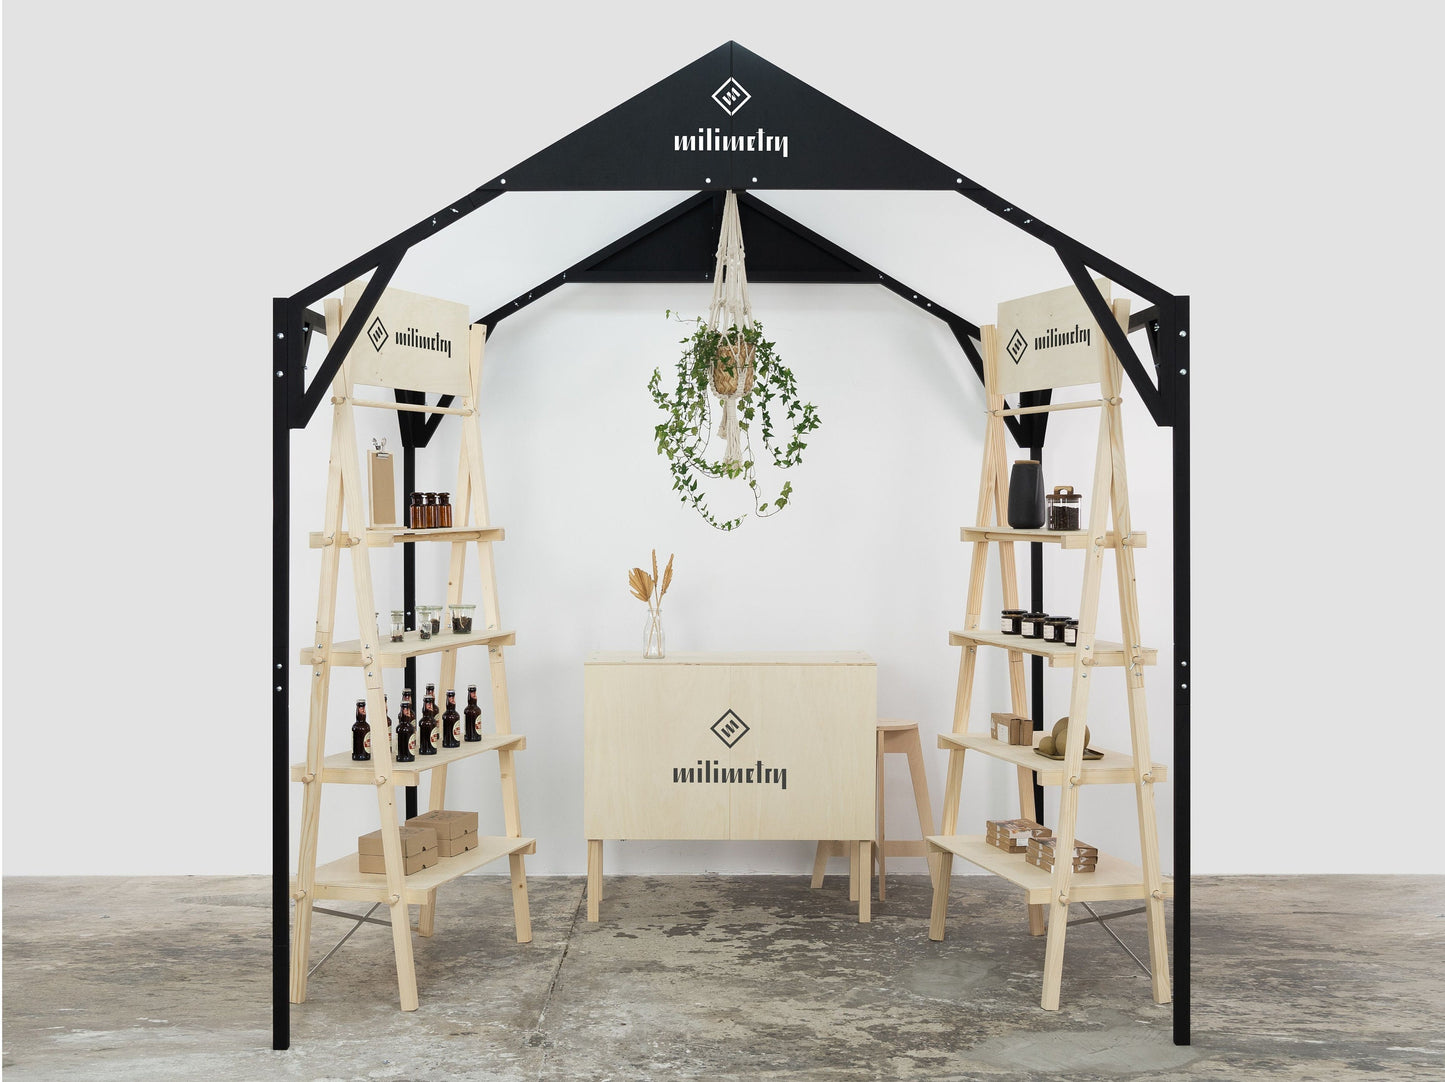 Trade show foldable wooden gazebo canopy VH-01, tent alternative, 6.5'x6.5', 8'x8', 10'x10' booth size | Milimetry